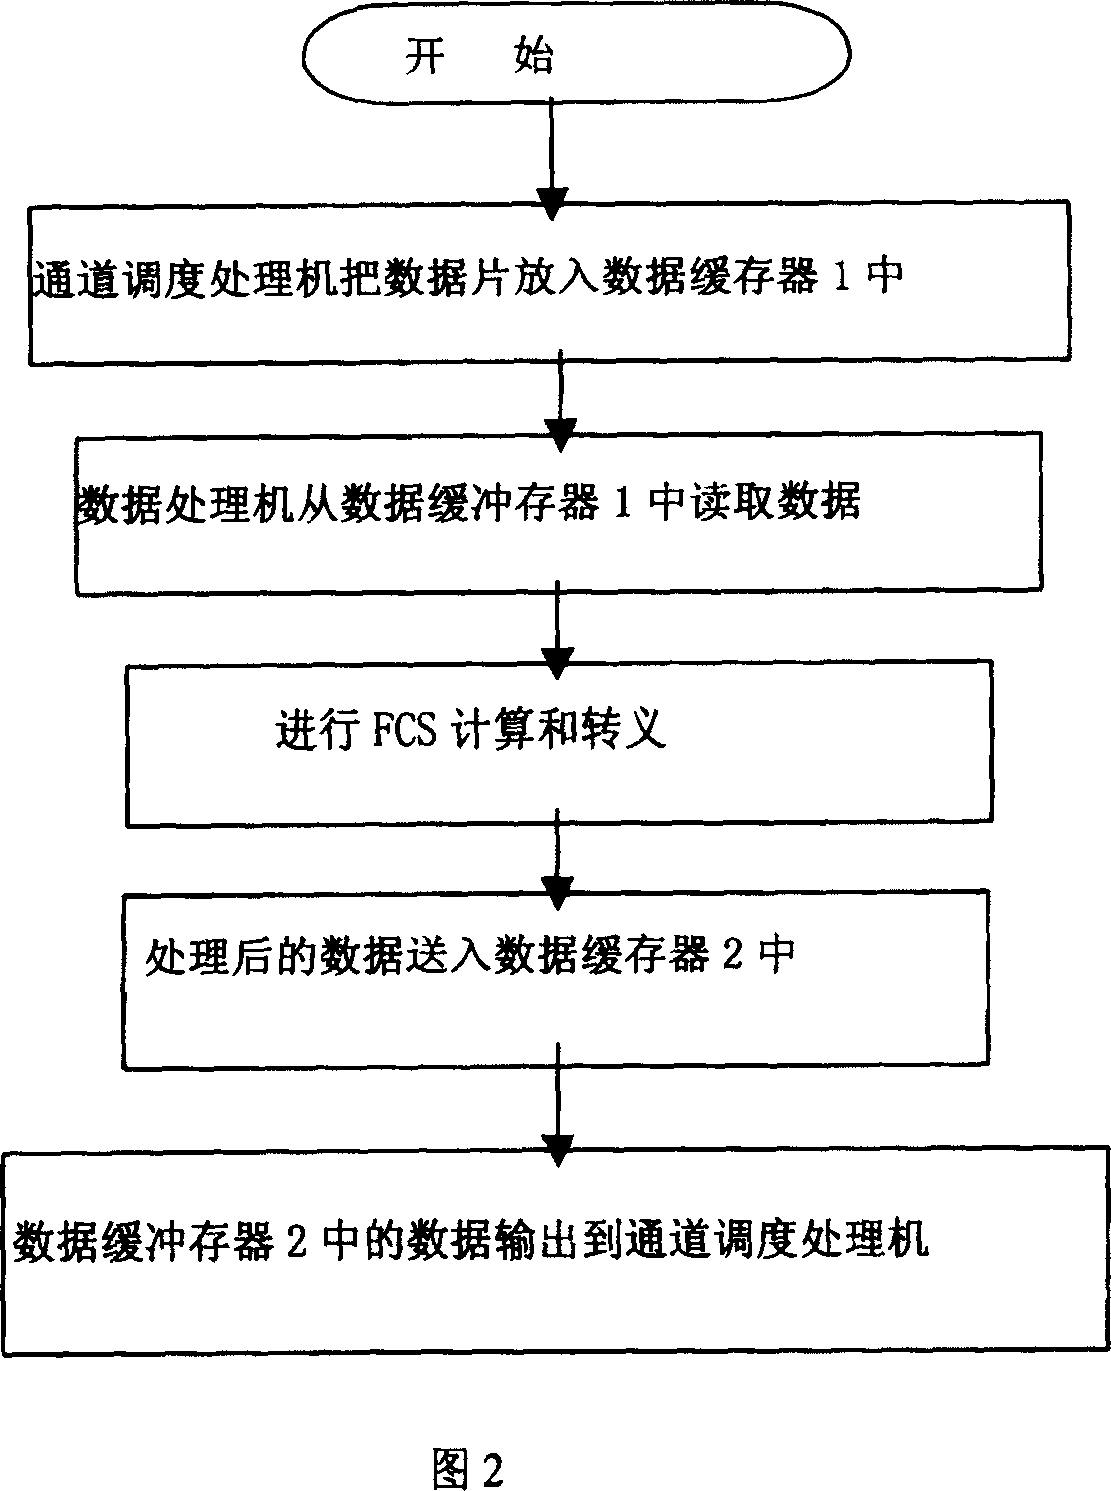 Method for implementing high-grade link control procedure prame treatment